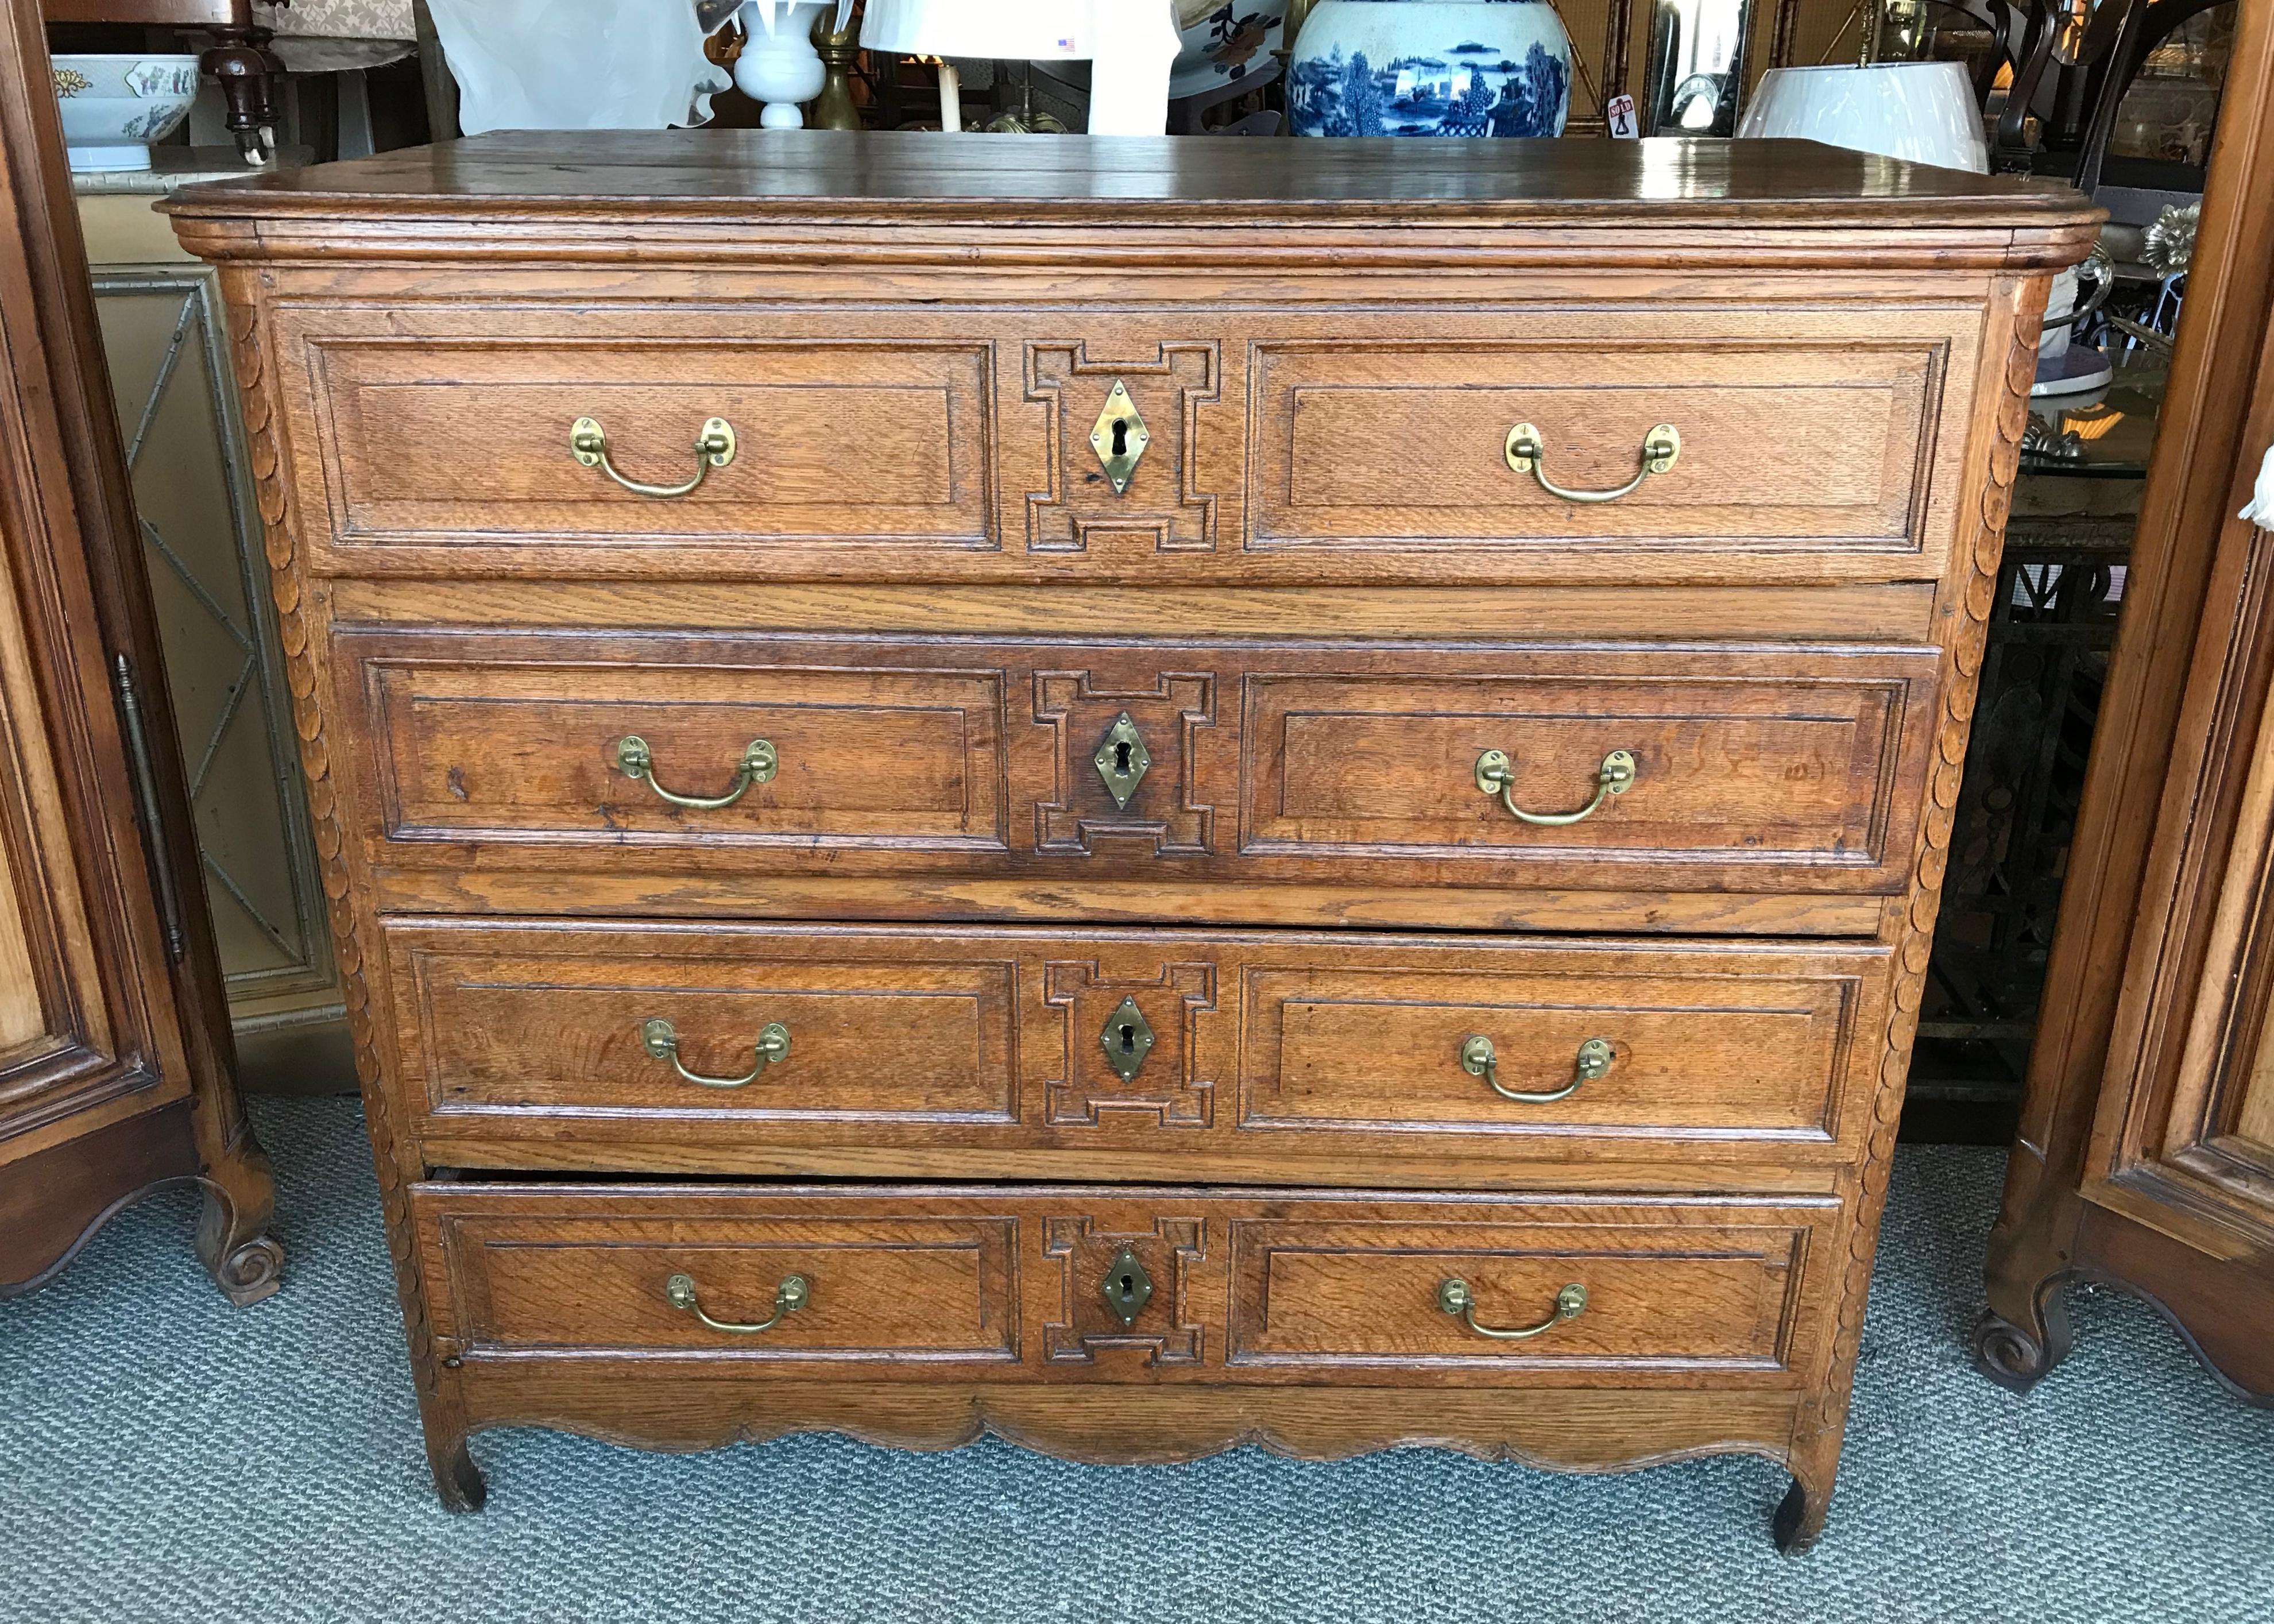 A beautiful Provincial piece with deep and richly carved design.
Fashioned in oak with a beautiful patina and fitted with 4 drawers.
Outstanding hardware.